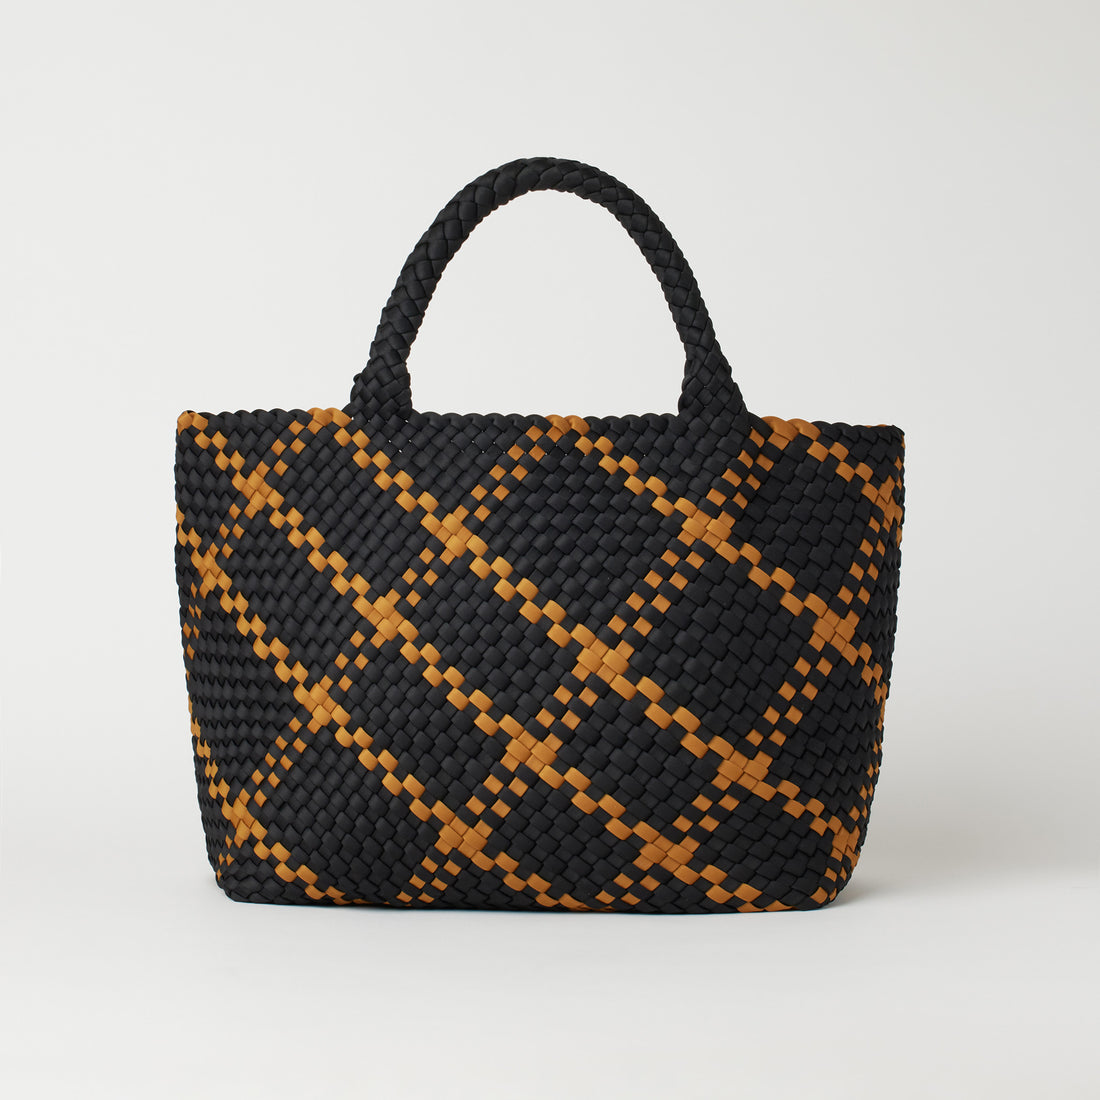 Andreina Bags Siempre tote bag in black colour with mustard criss cross stripes. Colour name is ochre. Large size yet lightweight. Handmade, interlaced material, synthetic material, water resistant, machine washable. Designed in Sydney, Australia.